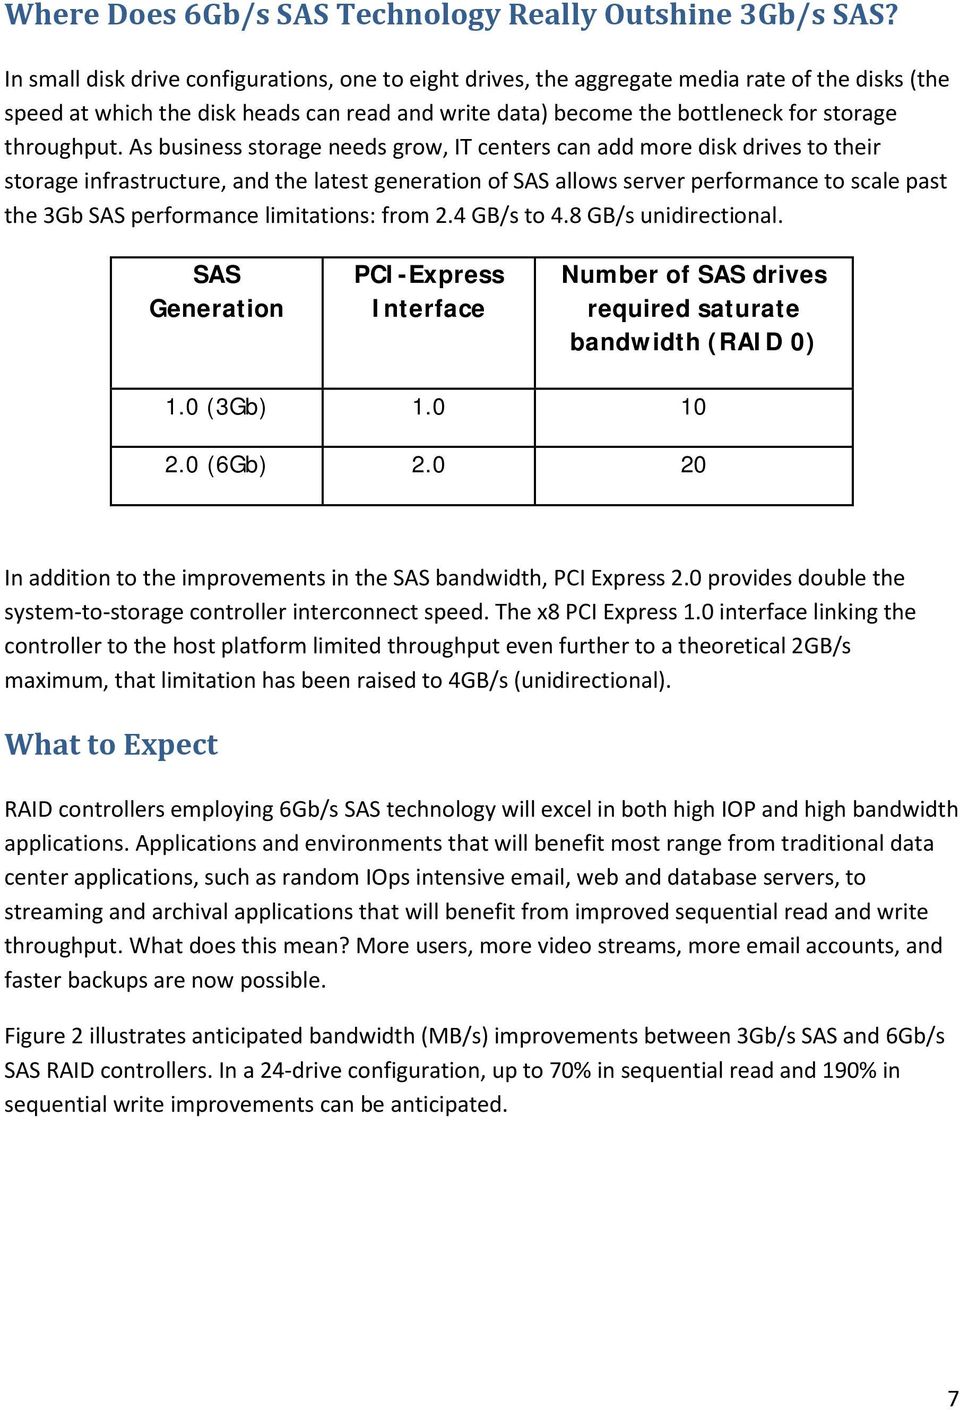 As business storage needs grow, IT centers can add more disk drives to their storage infrastructure, and the latest generation of SAS allows server performance to scale past the 3Gb SAS performance